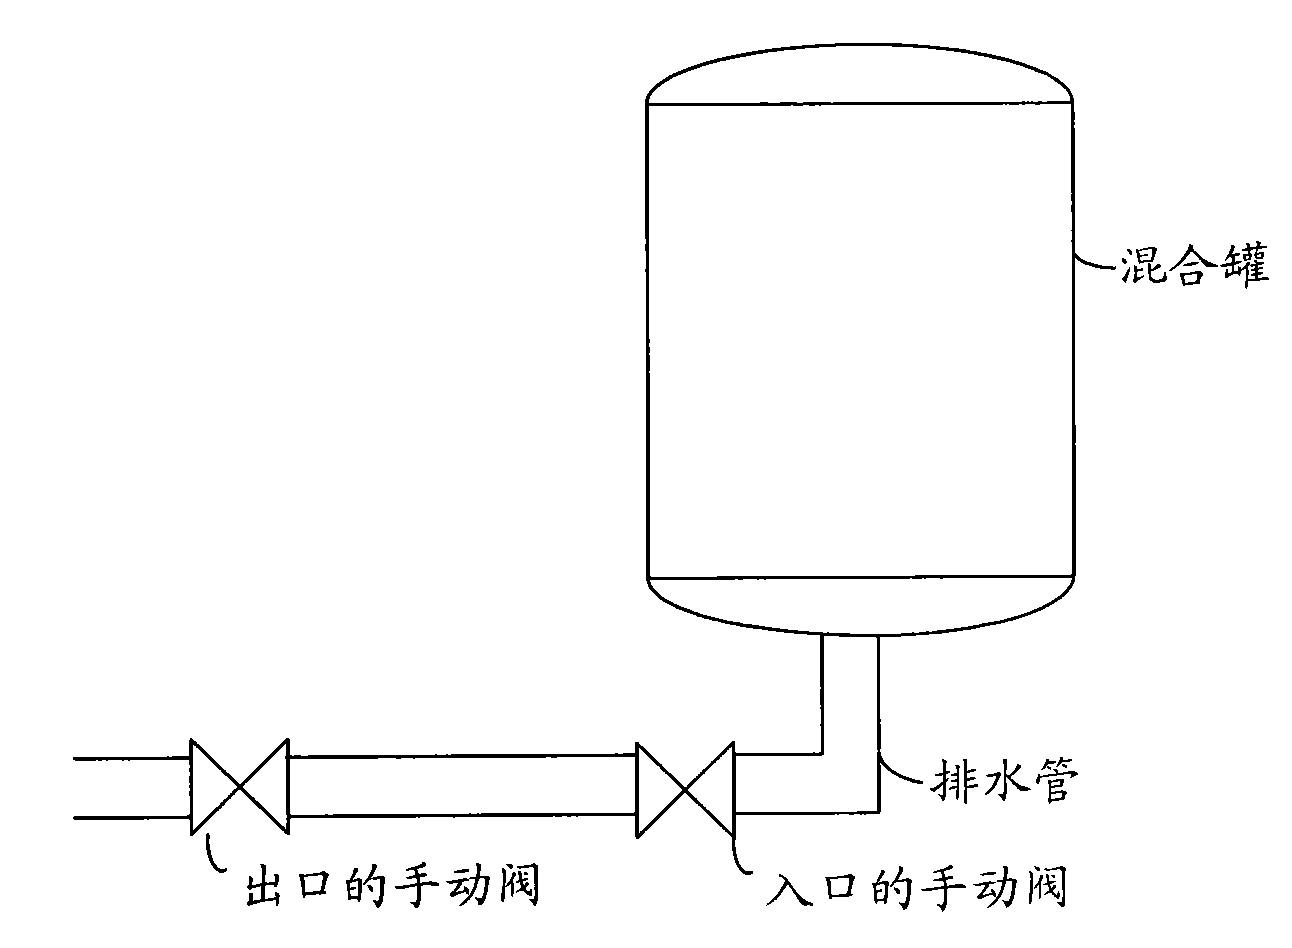 Slurry mixing system as well as drainage pipe and cleaning method applied to same